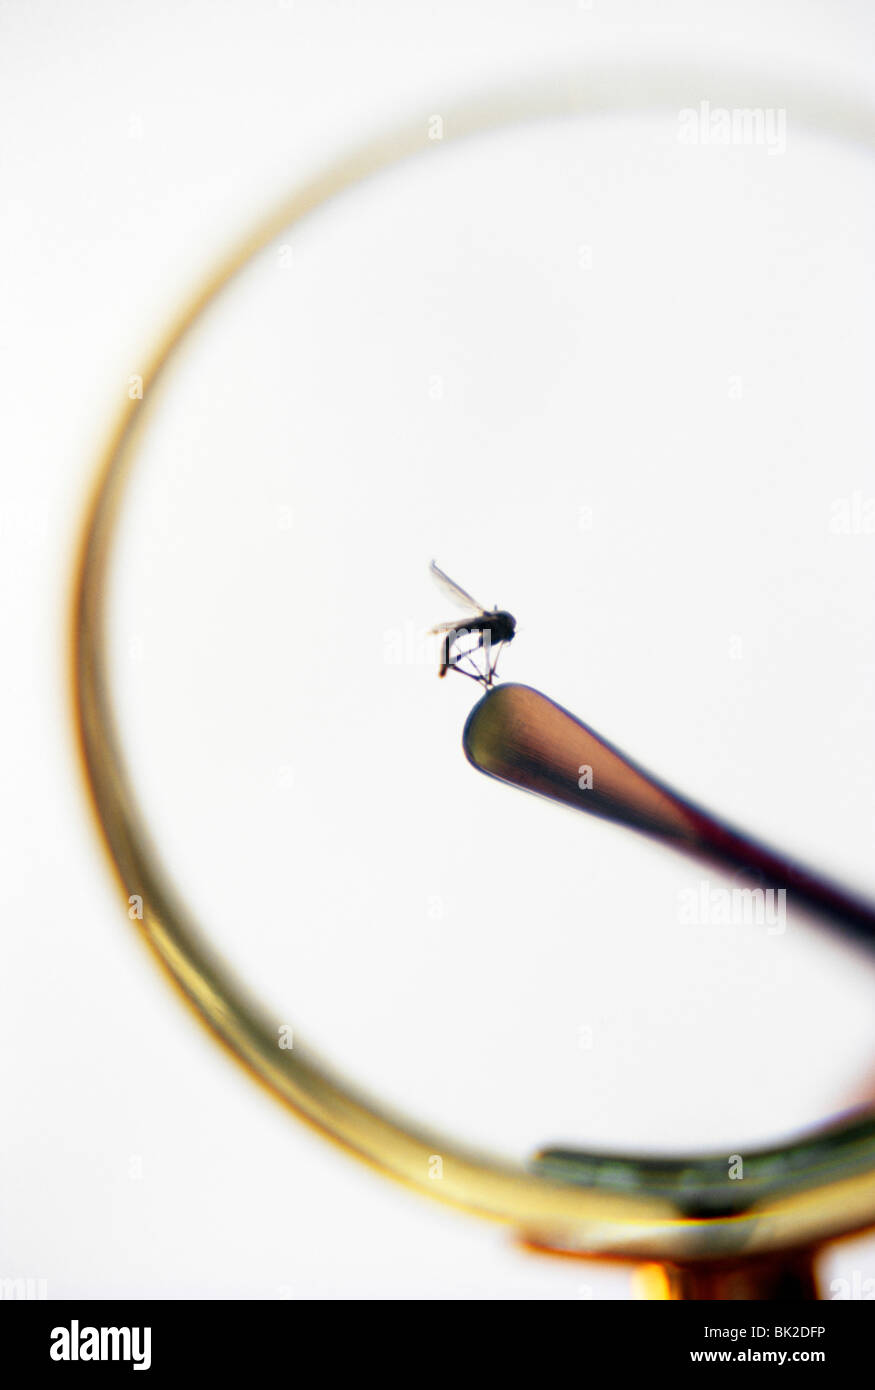 Dead mosquito under magnifying glass Stock Photo